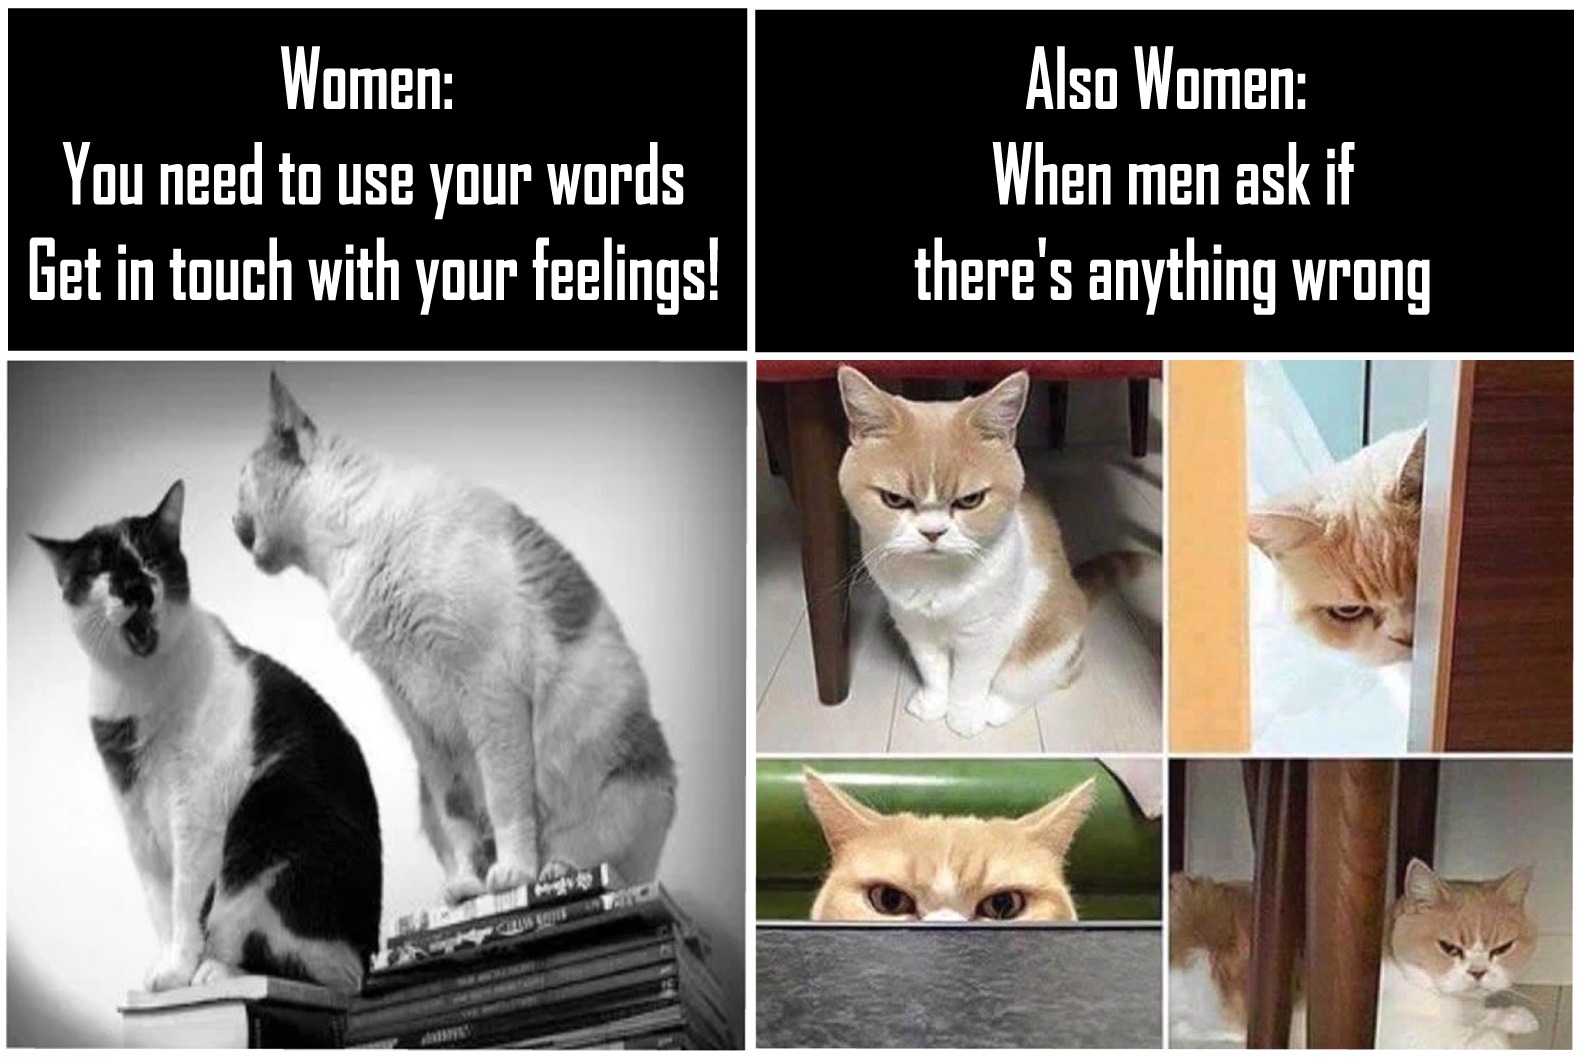 memes - relationship memes - Women You need to use your words Get in touch with your feelings! Also Women When men ask if there's anything wrong